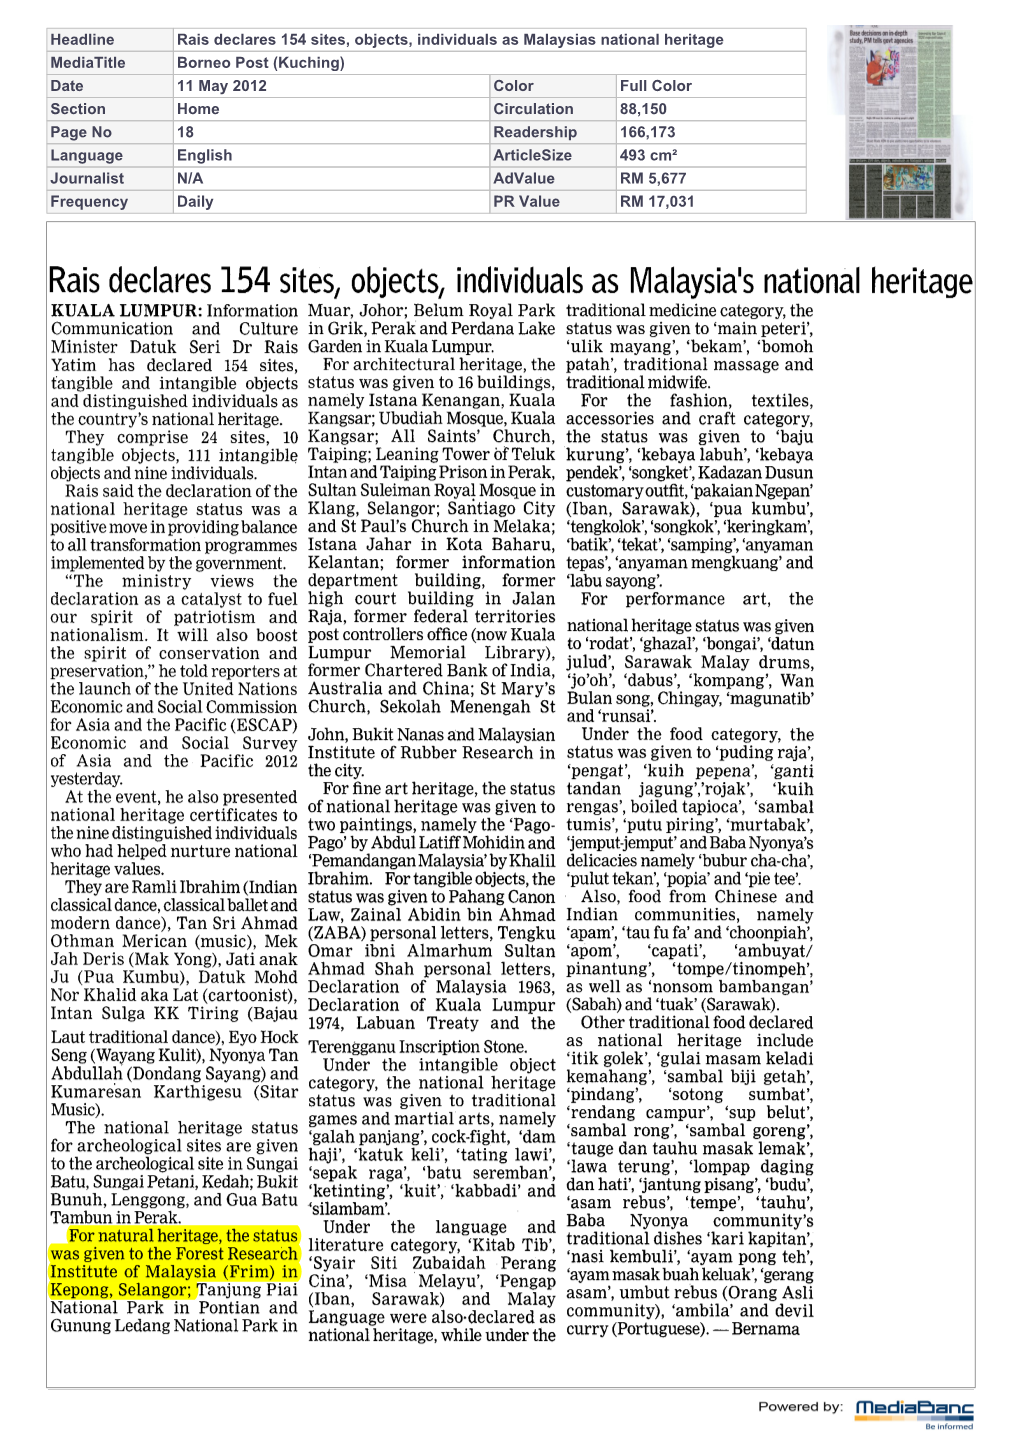 Rais Declares 154 Sites, Objects, Individuals As Malaysia's National Heritage